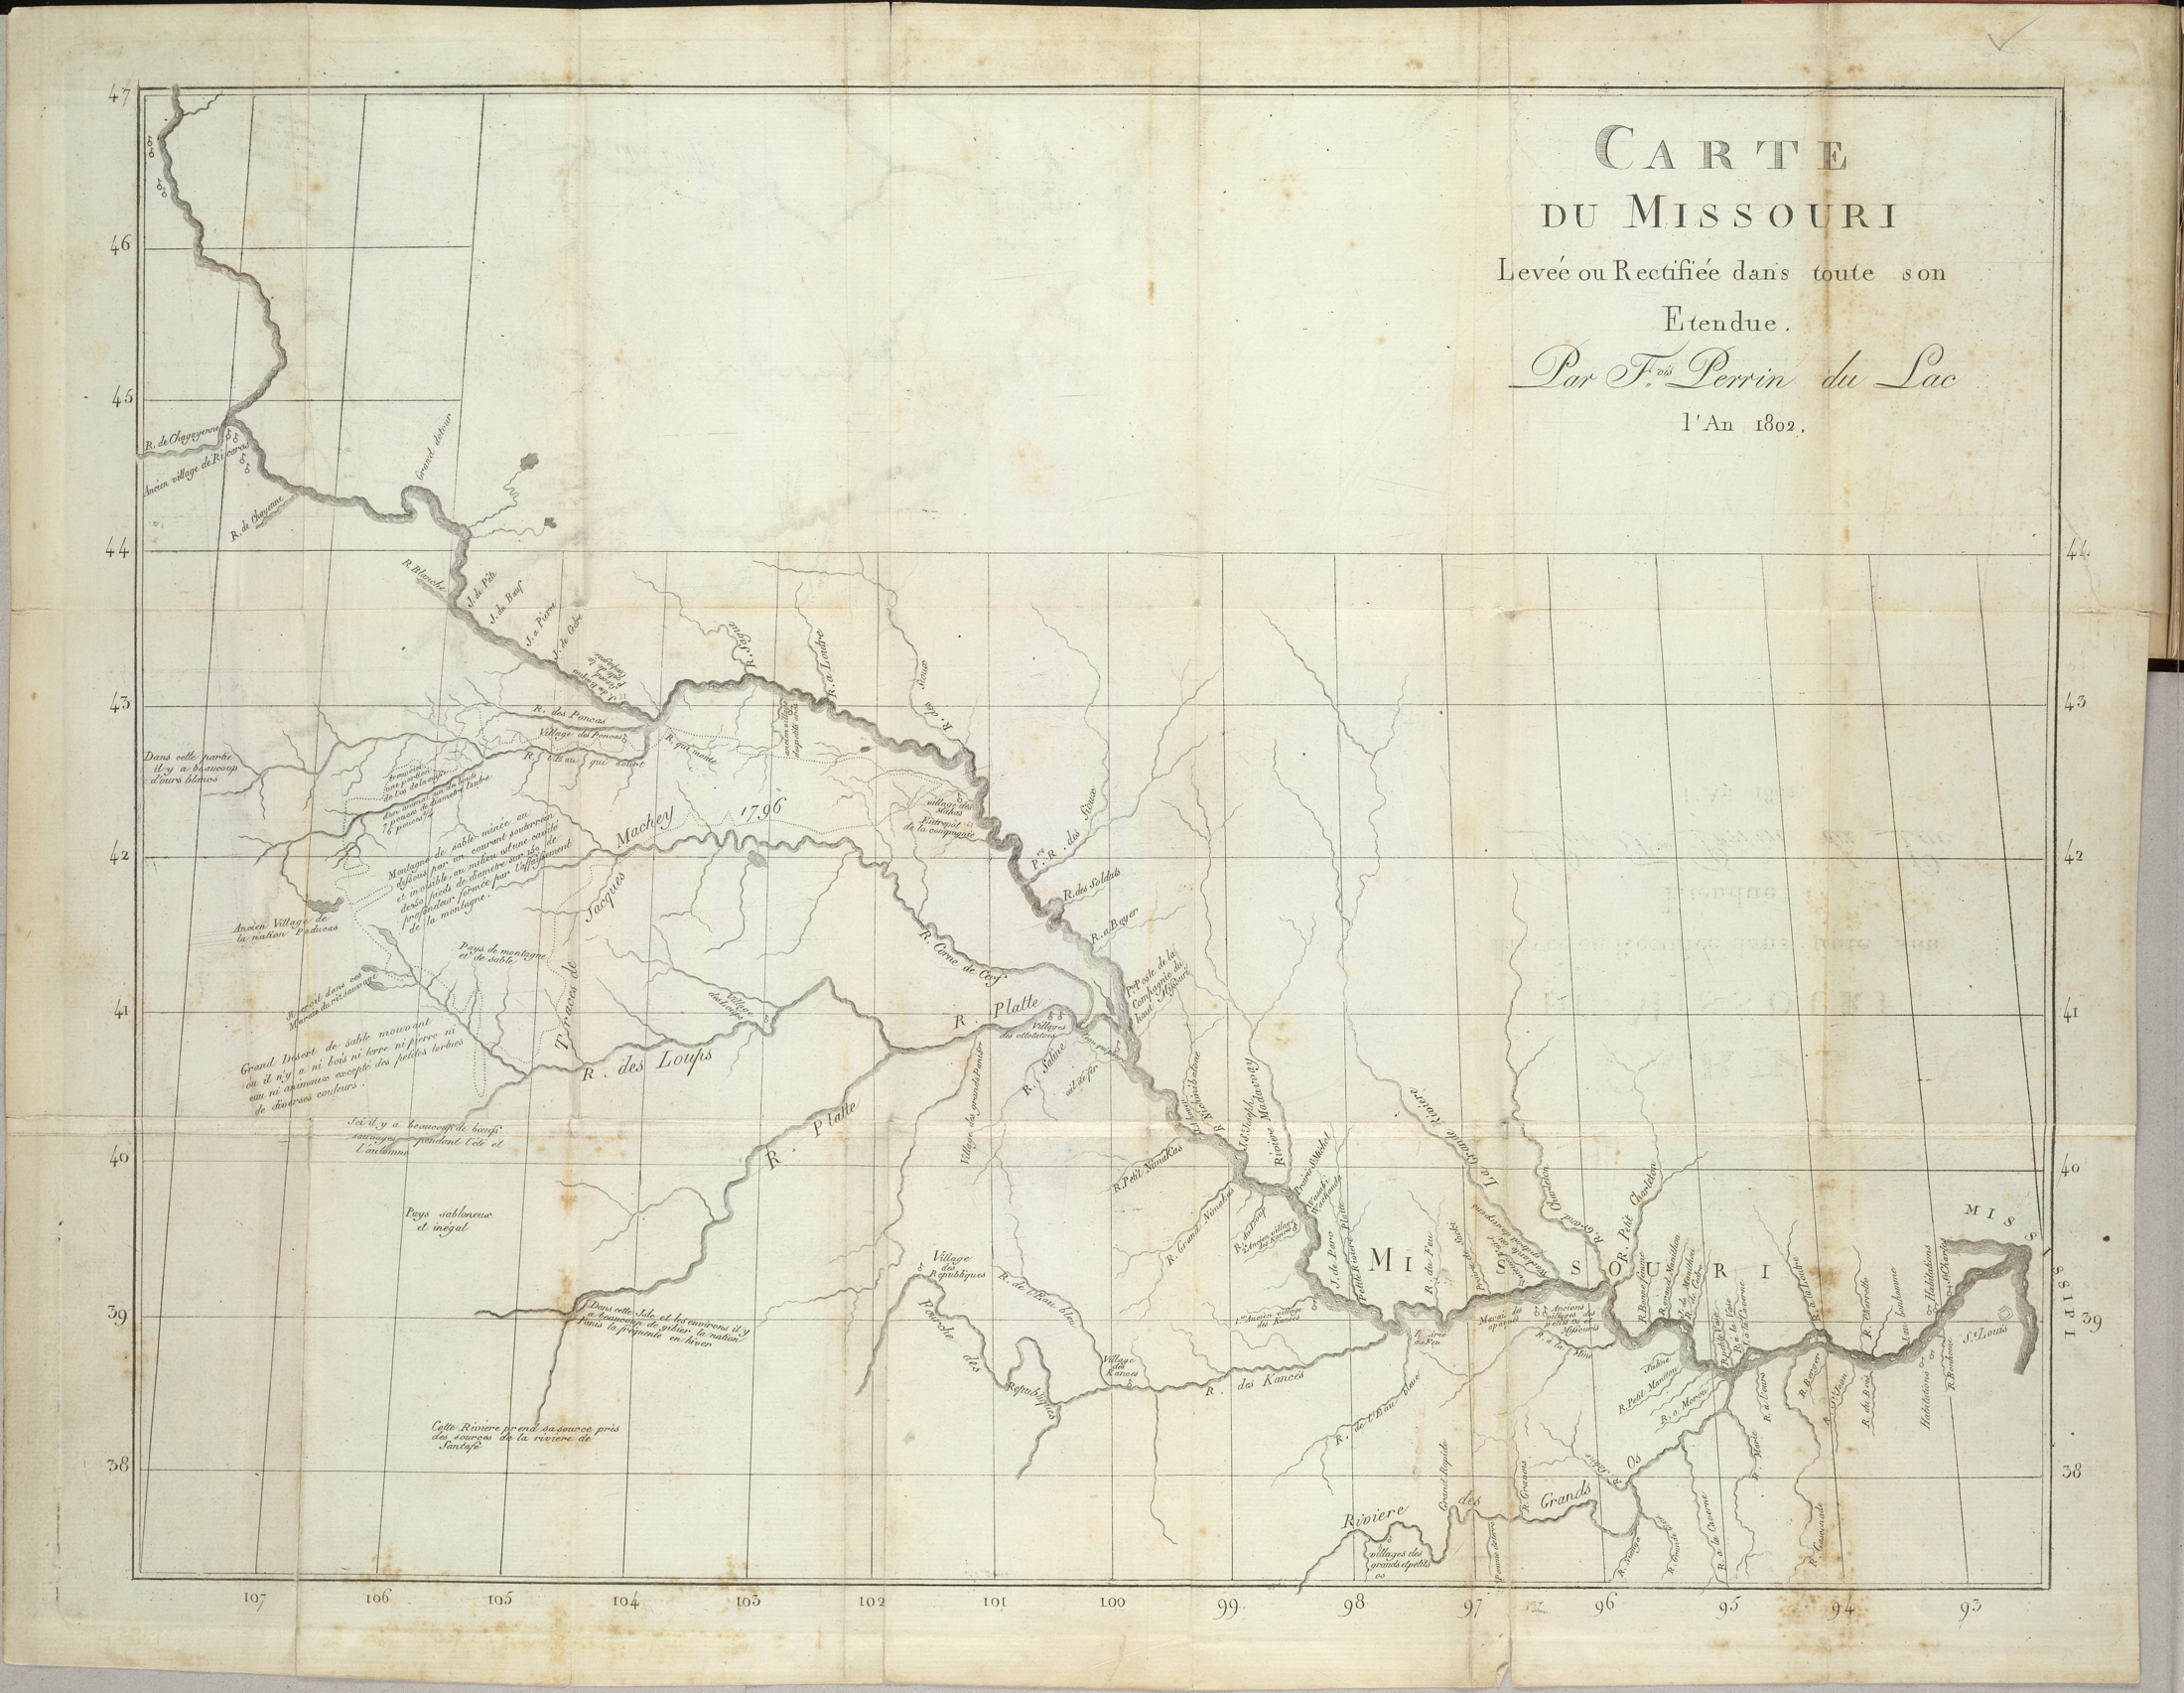 Perrin du Lac’s "Map of the Banks of the Missouri River" (1802), locates the Pawnee Republic (Village des Republic) on the Republican Fork of the Kansas River[1]